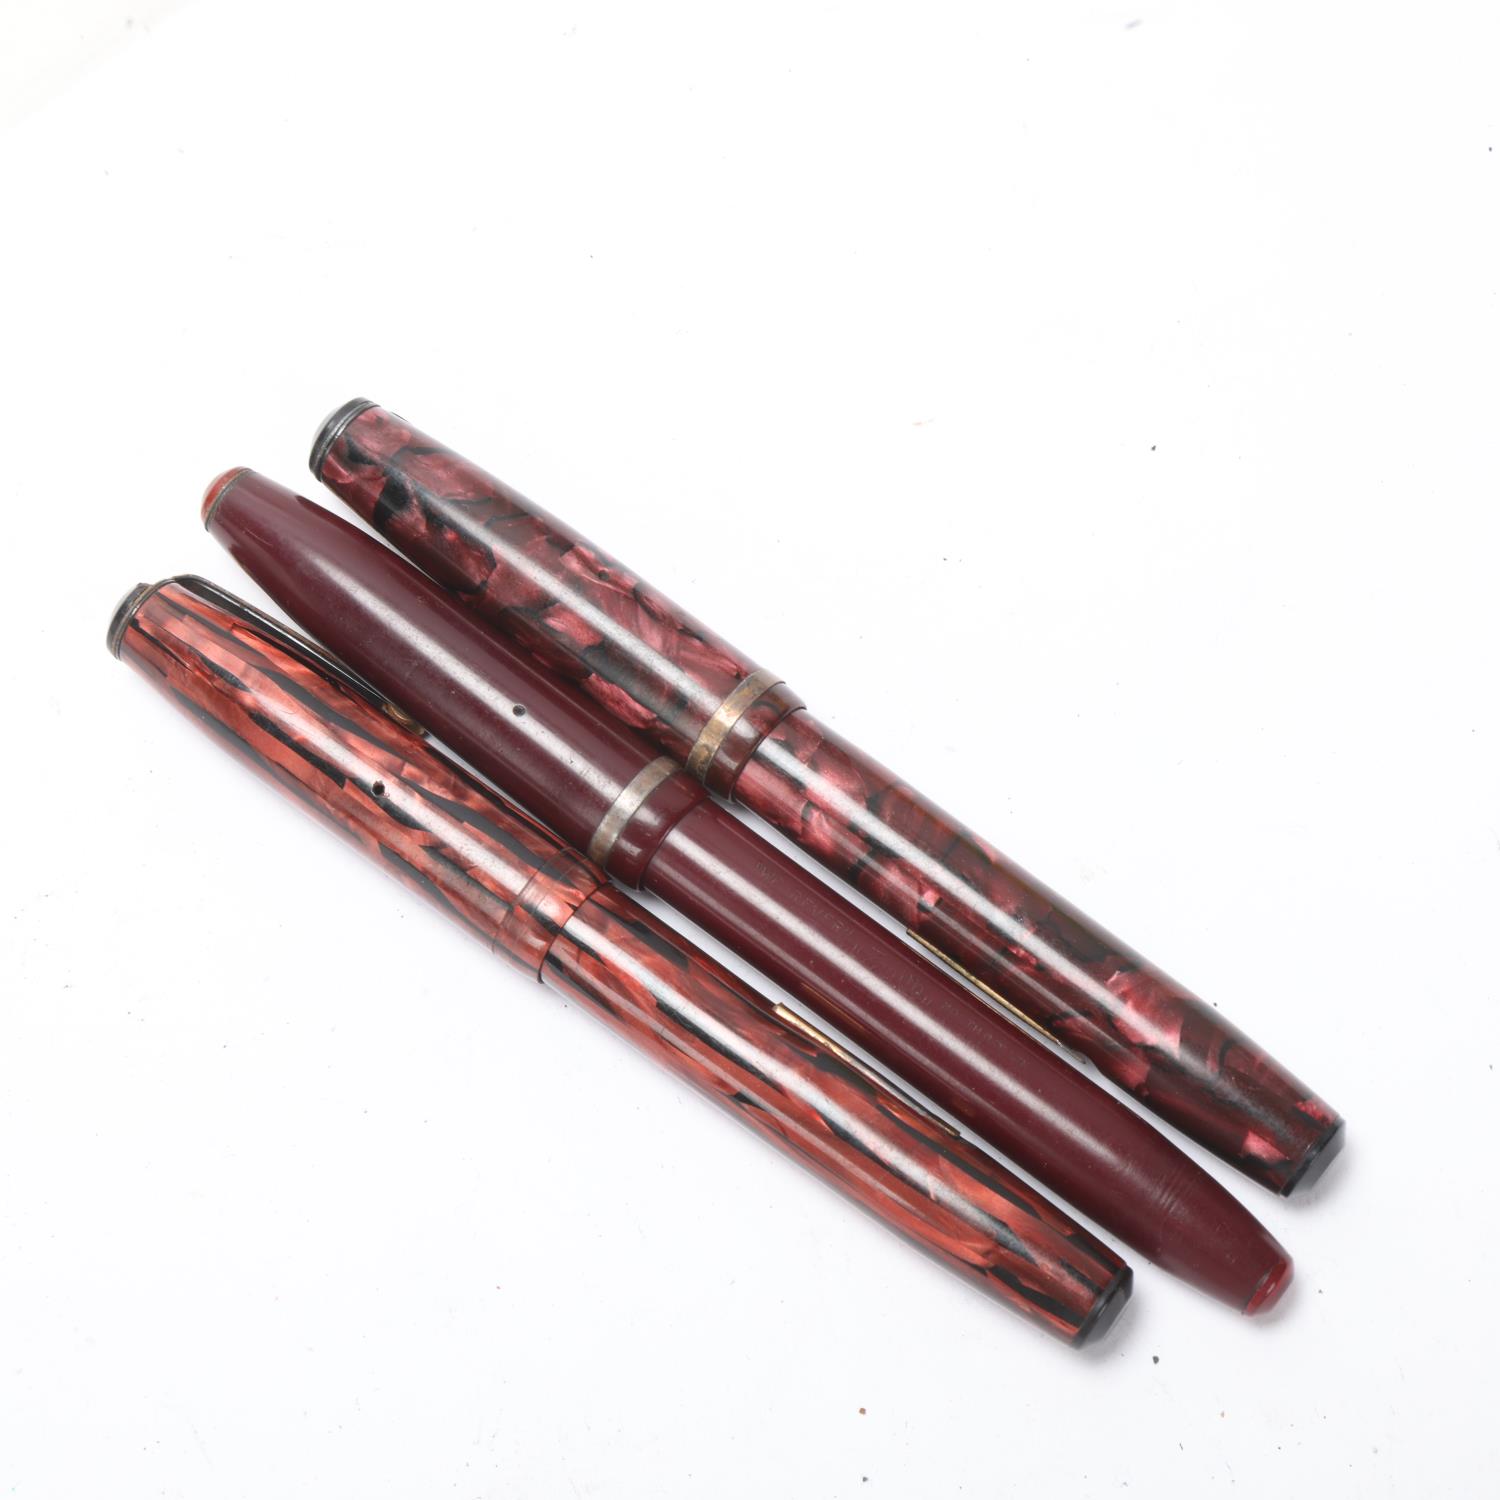 3 vintage Wearever, USA, lever fill fountain pens, circa 1940s' Marbled pens in complete untested - Bild 4 aus 4